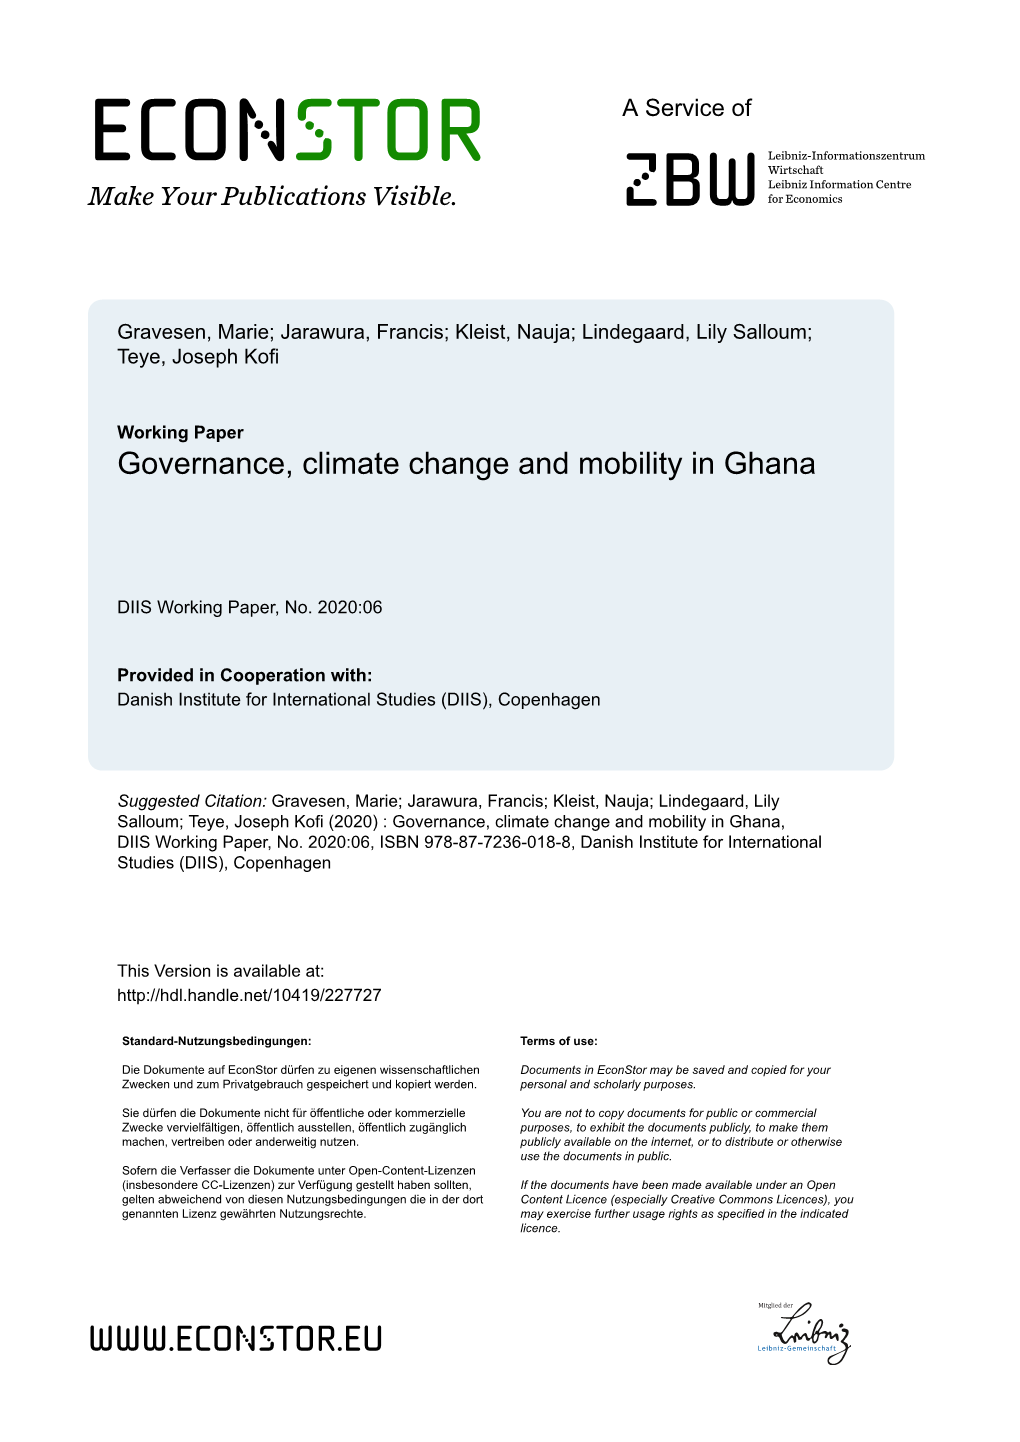 Governance, Climate Change and Mobility in Ghana